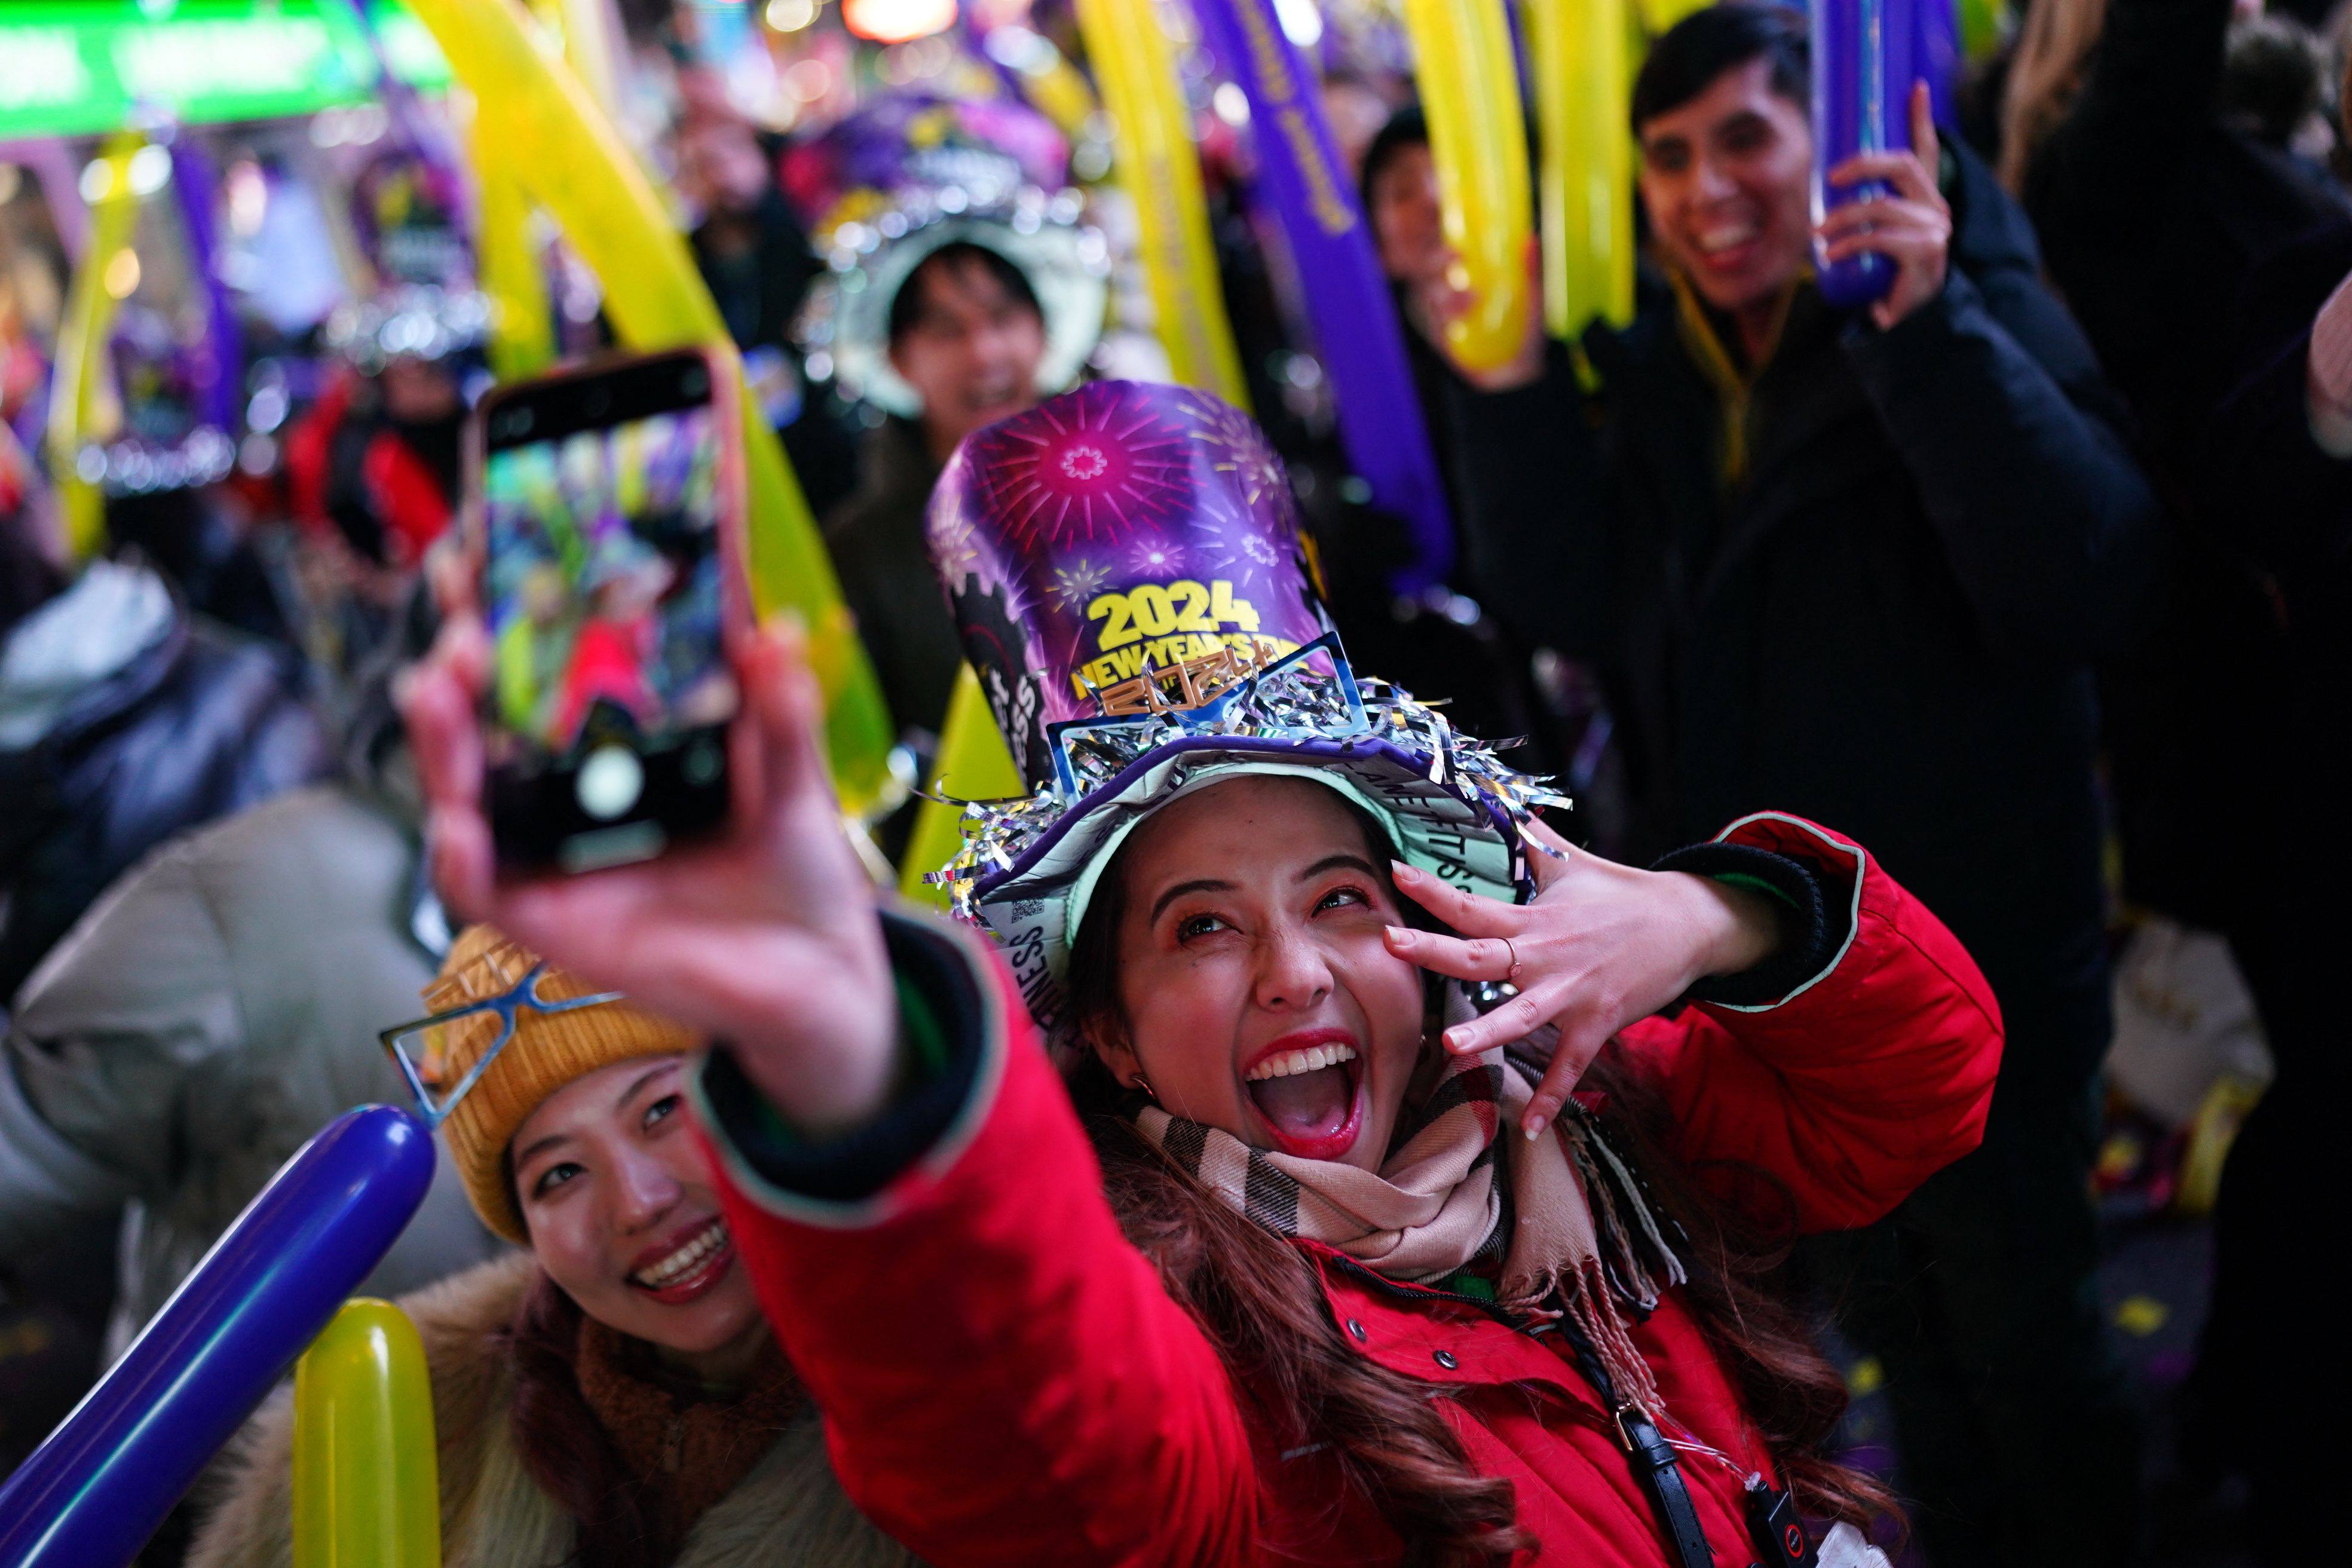 Revellers celebrate New Year’s in Times Square, New York City. Photo: AFP